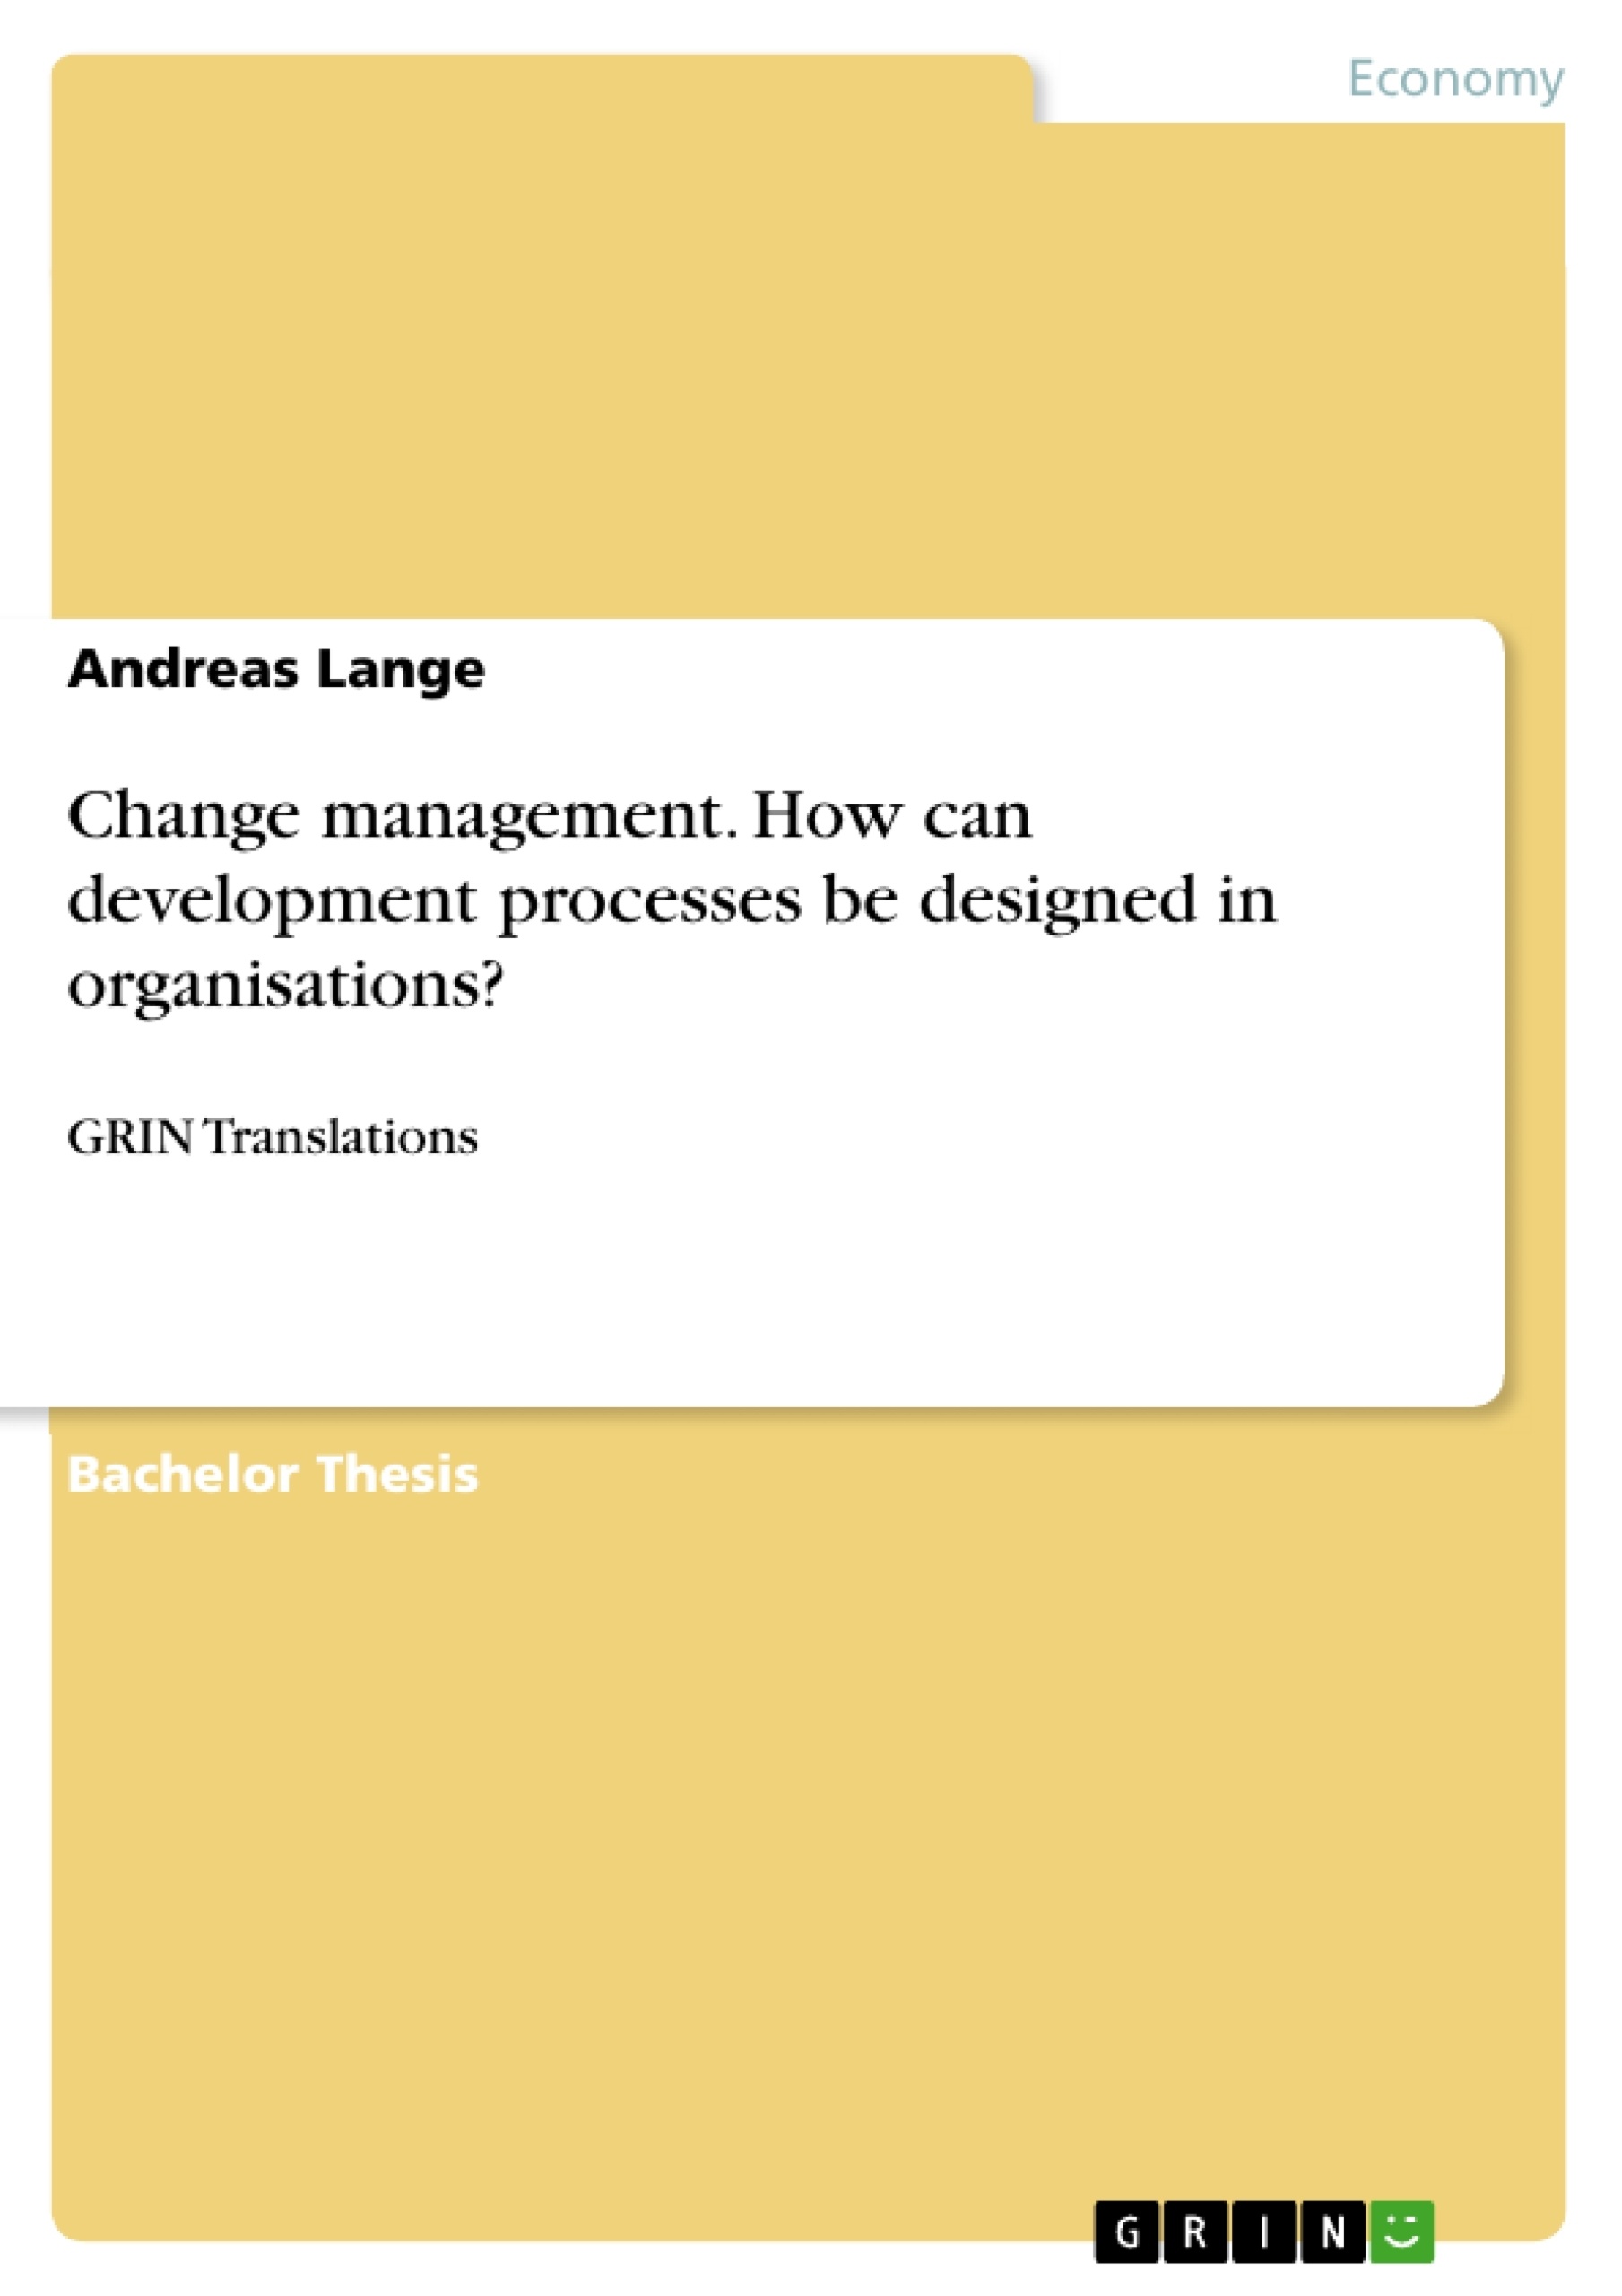 Title: Change management. How can development processes be designed in organisations?